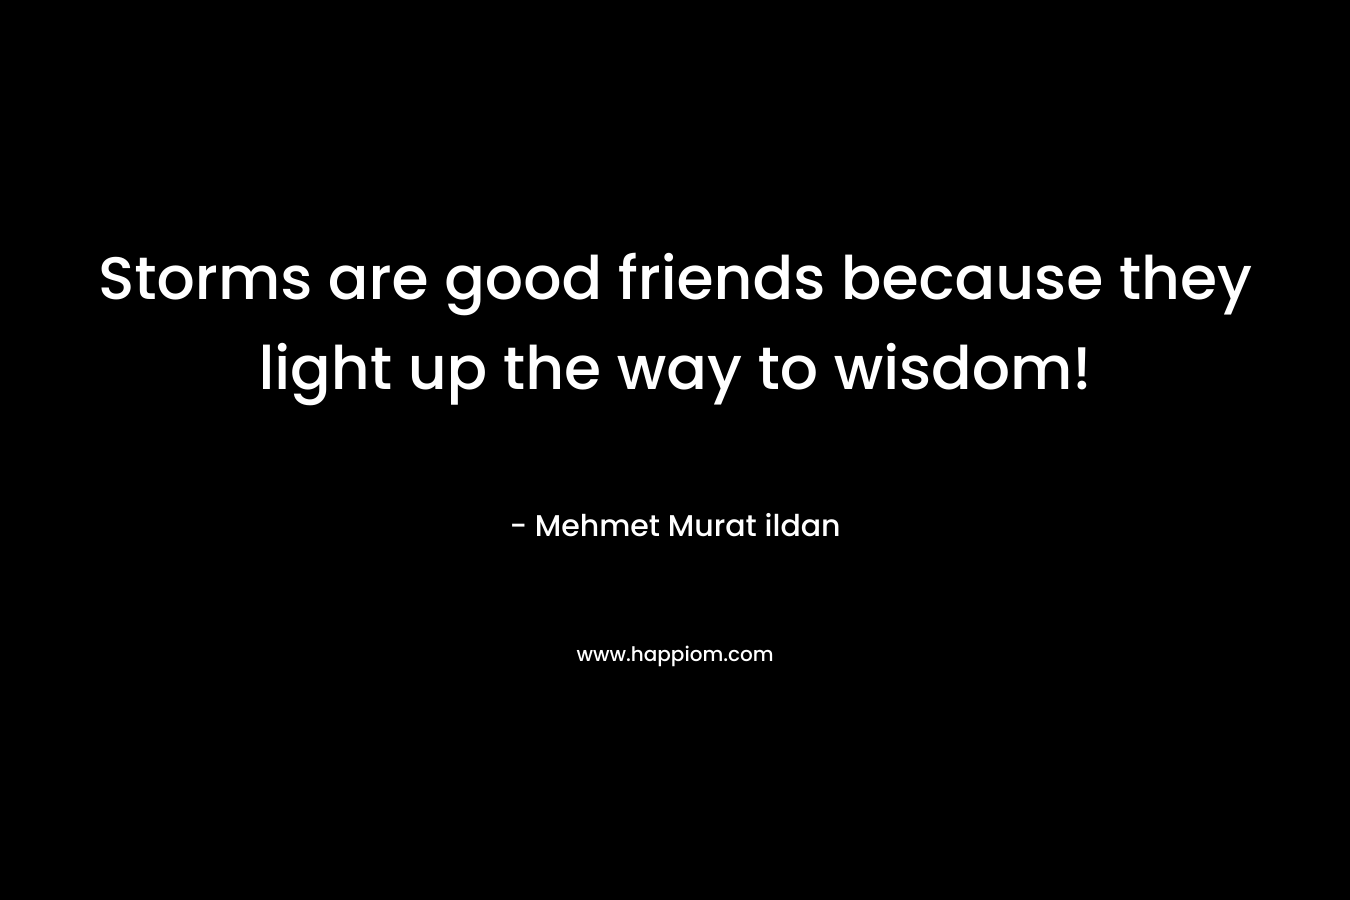 Storms are good friends because they light up the way to wisdom!